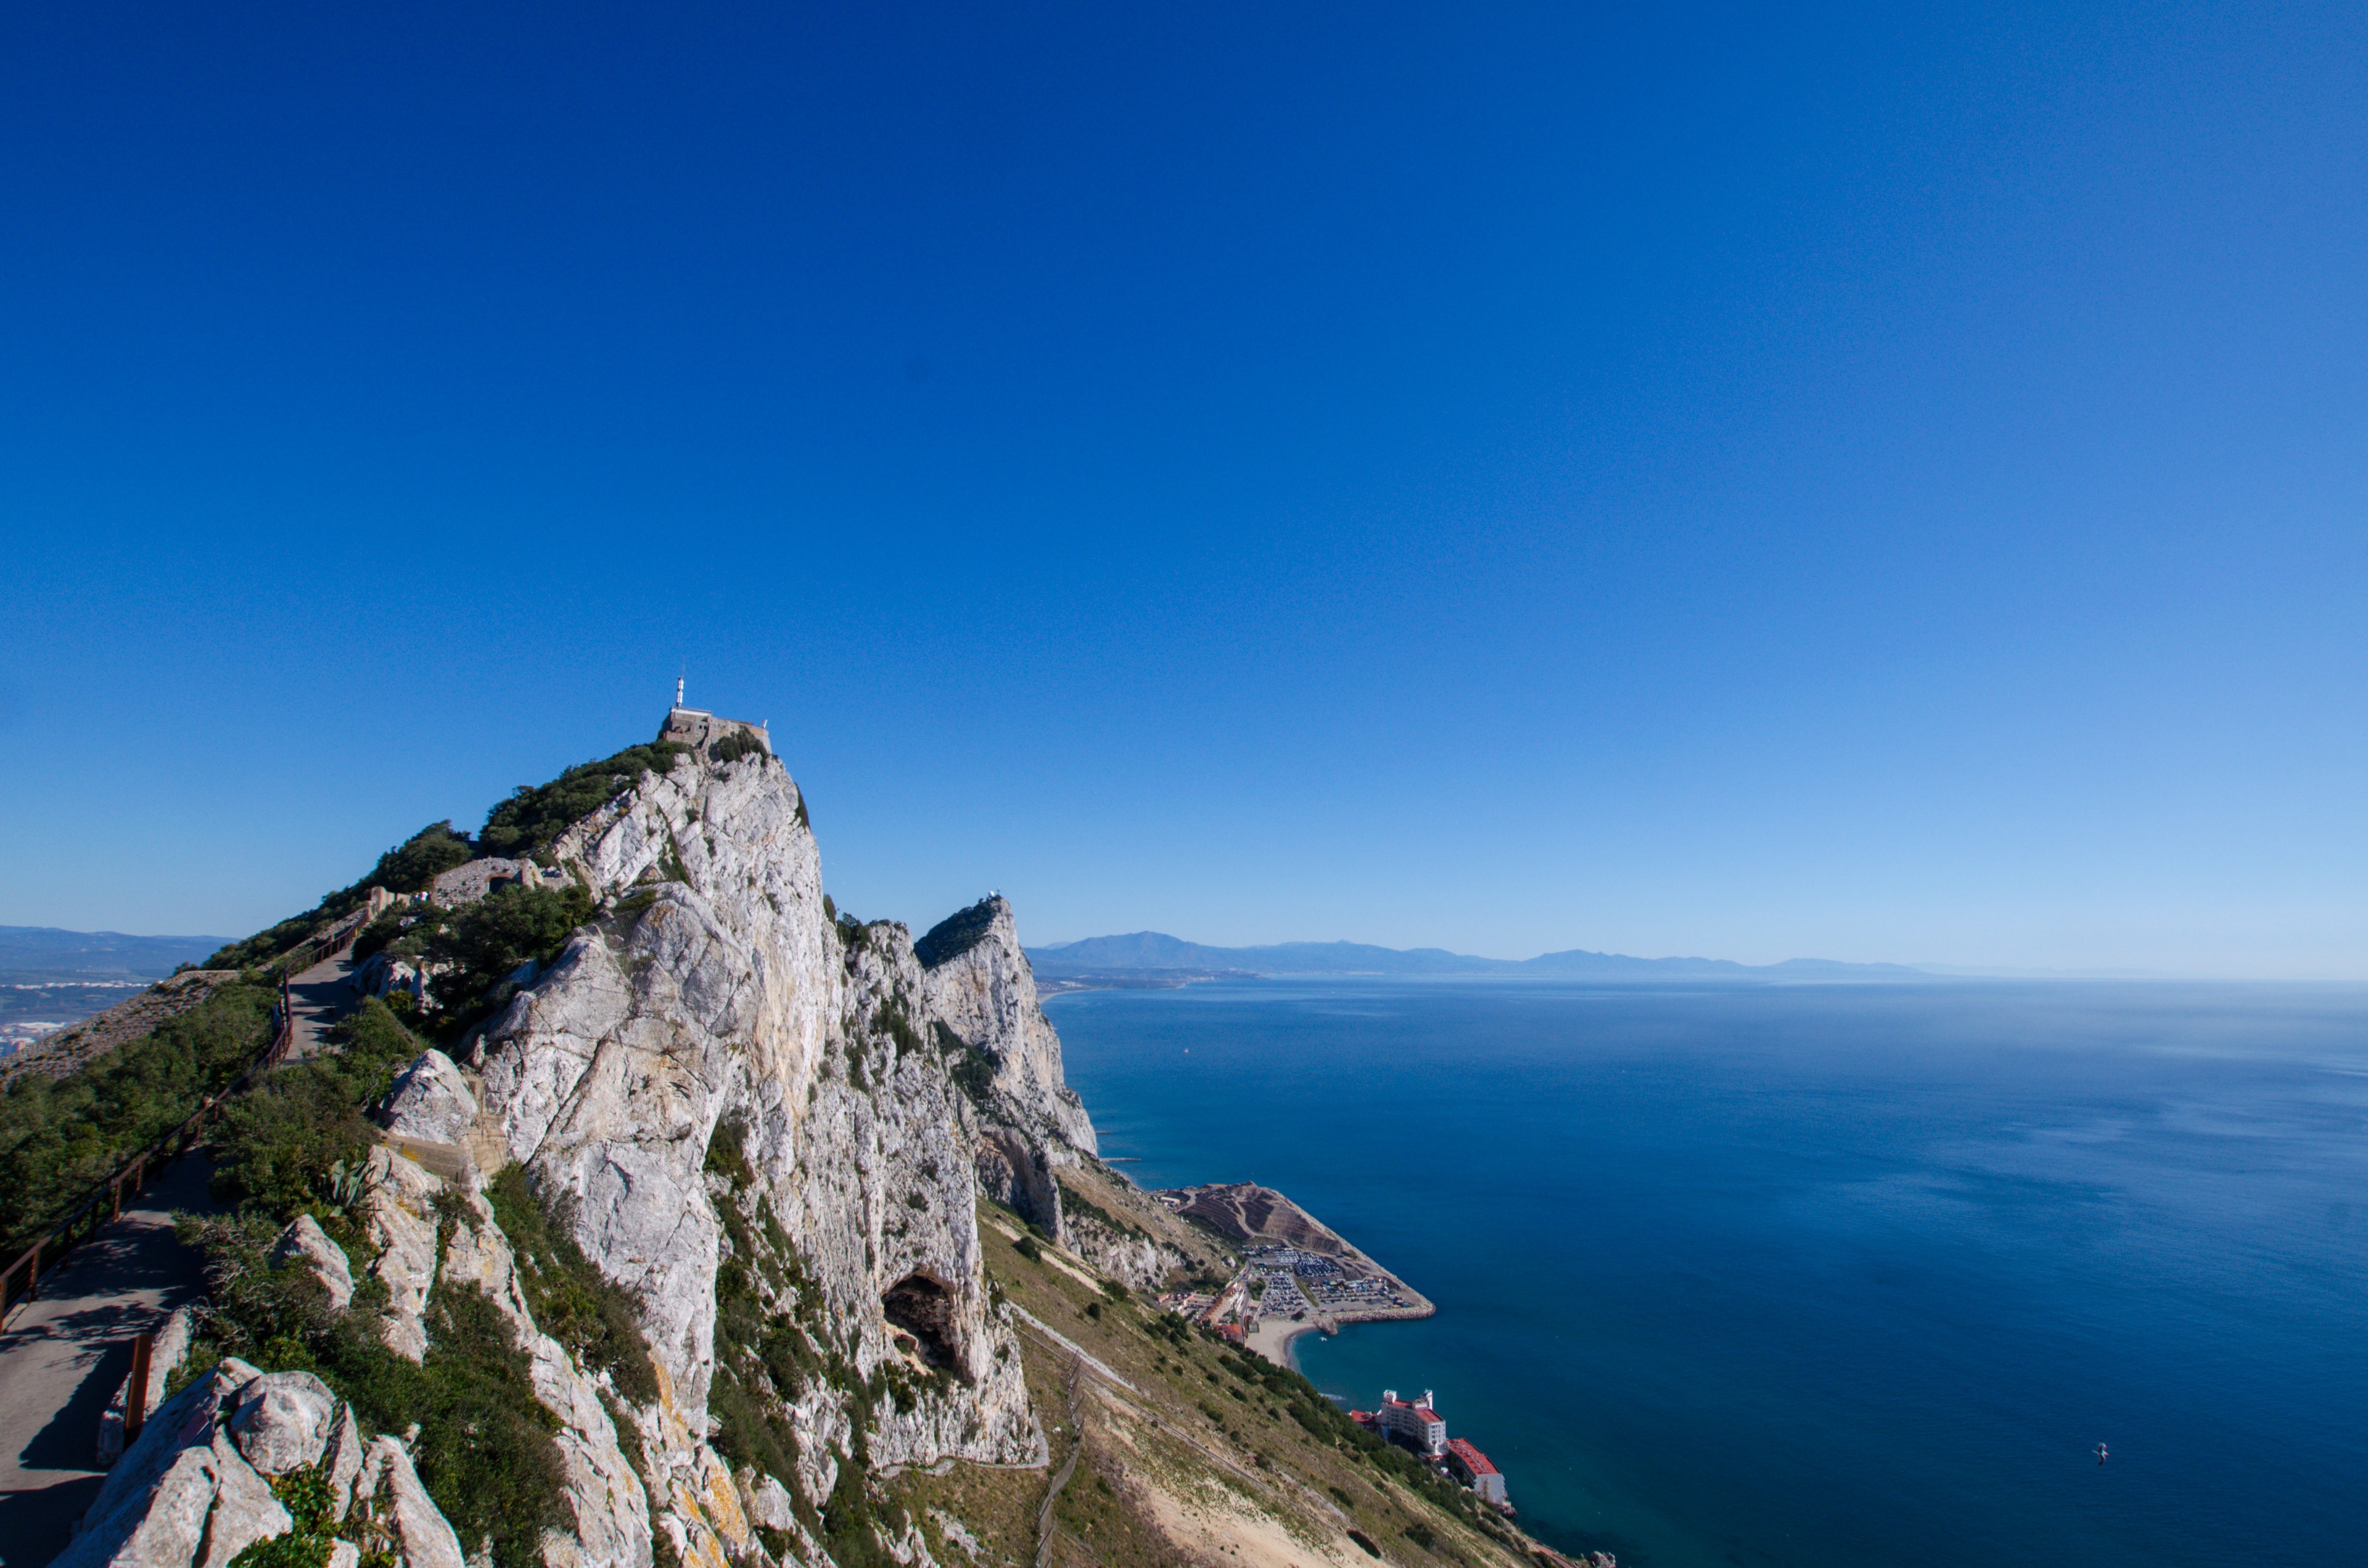 View taken from the recently opened Skywalk looking towards 'The top of the rock' Gibraltar. Access to the Skywalk is included with the nature reserve entrance fee. Yes it was officially opened by Mark Hamill.